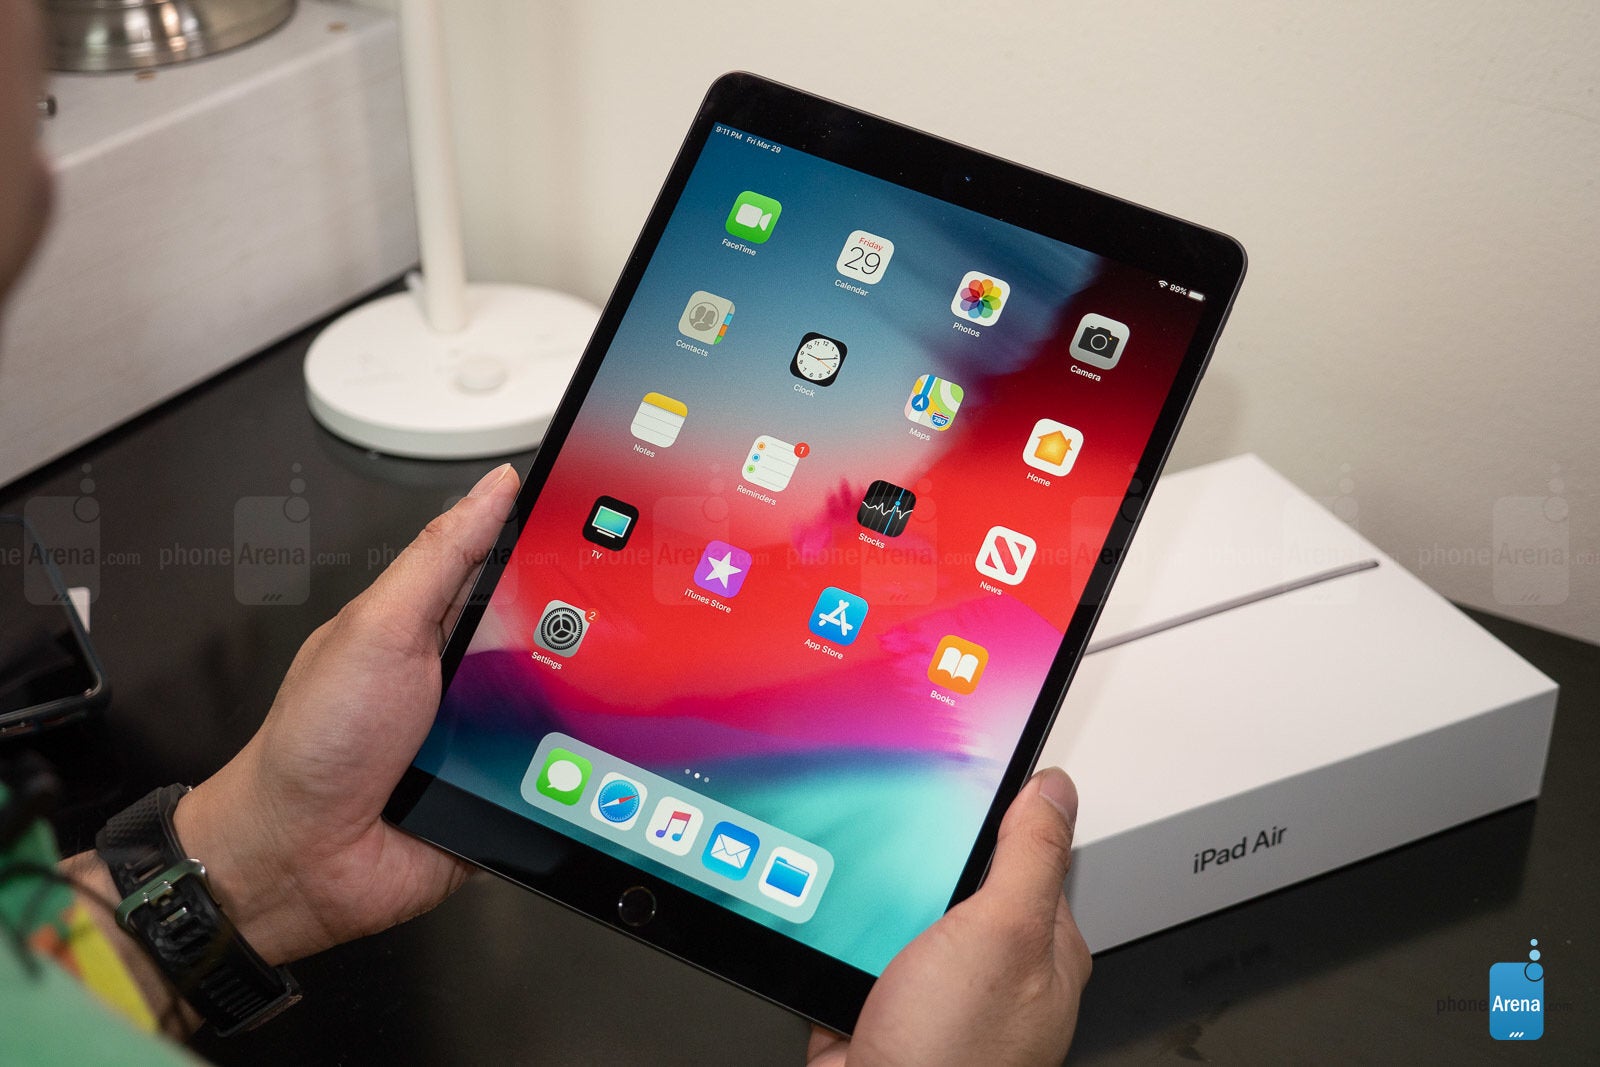 What's new in iPadOS 14? Which iPads will support iPadOS 14?